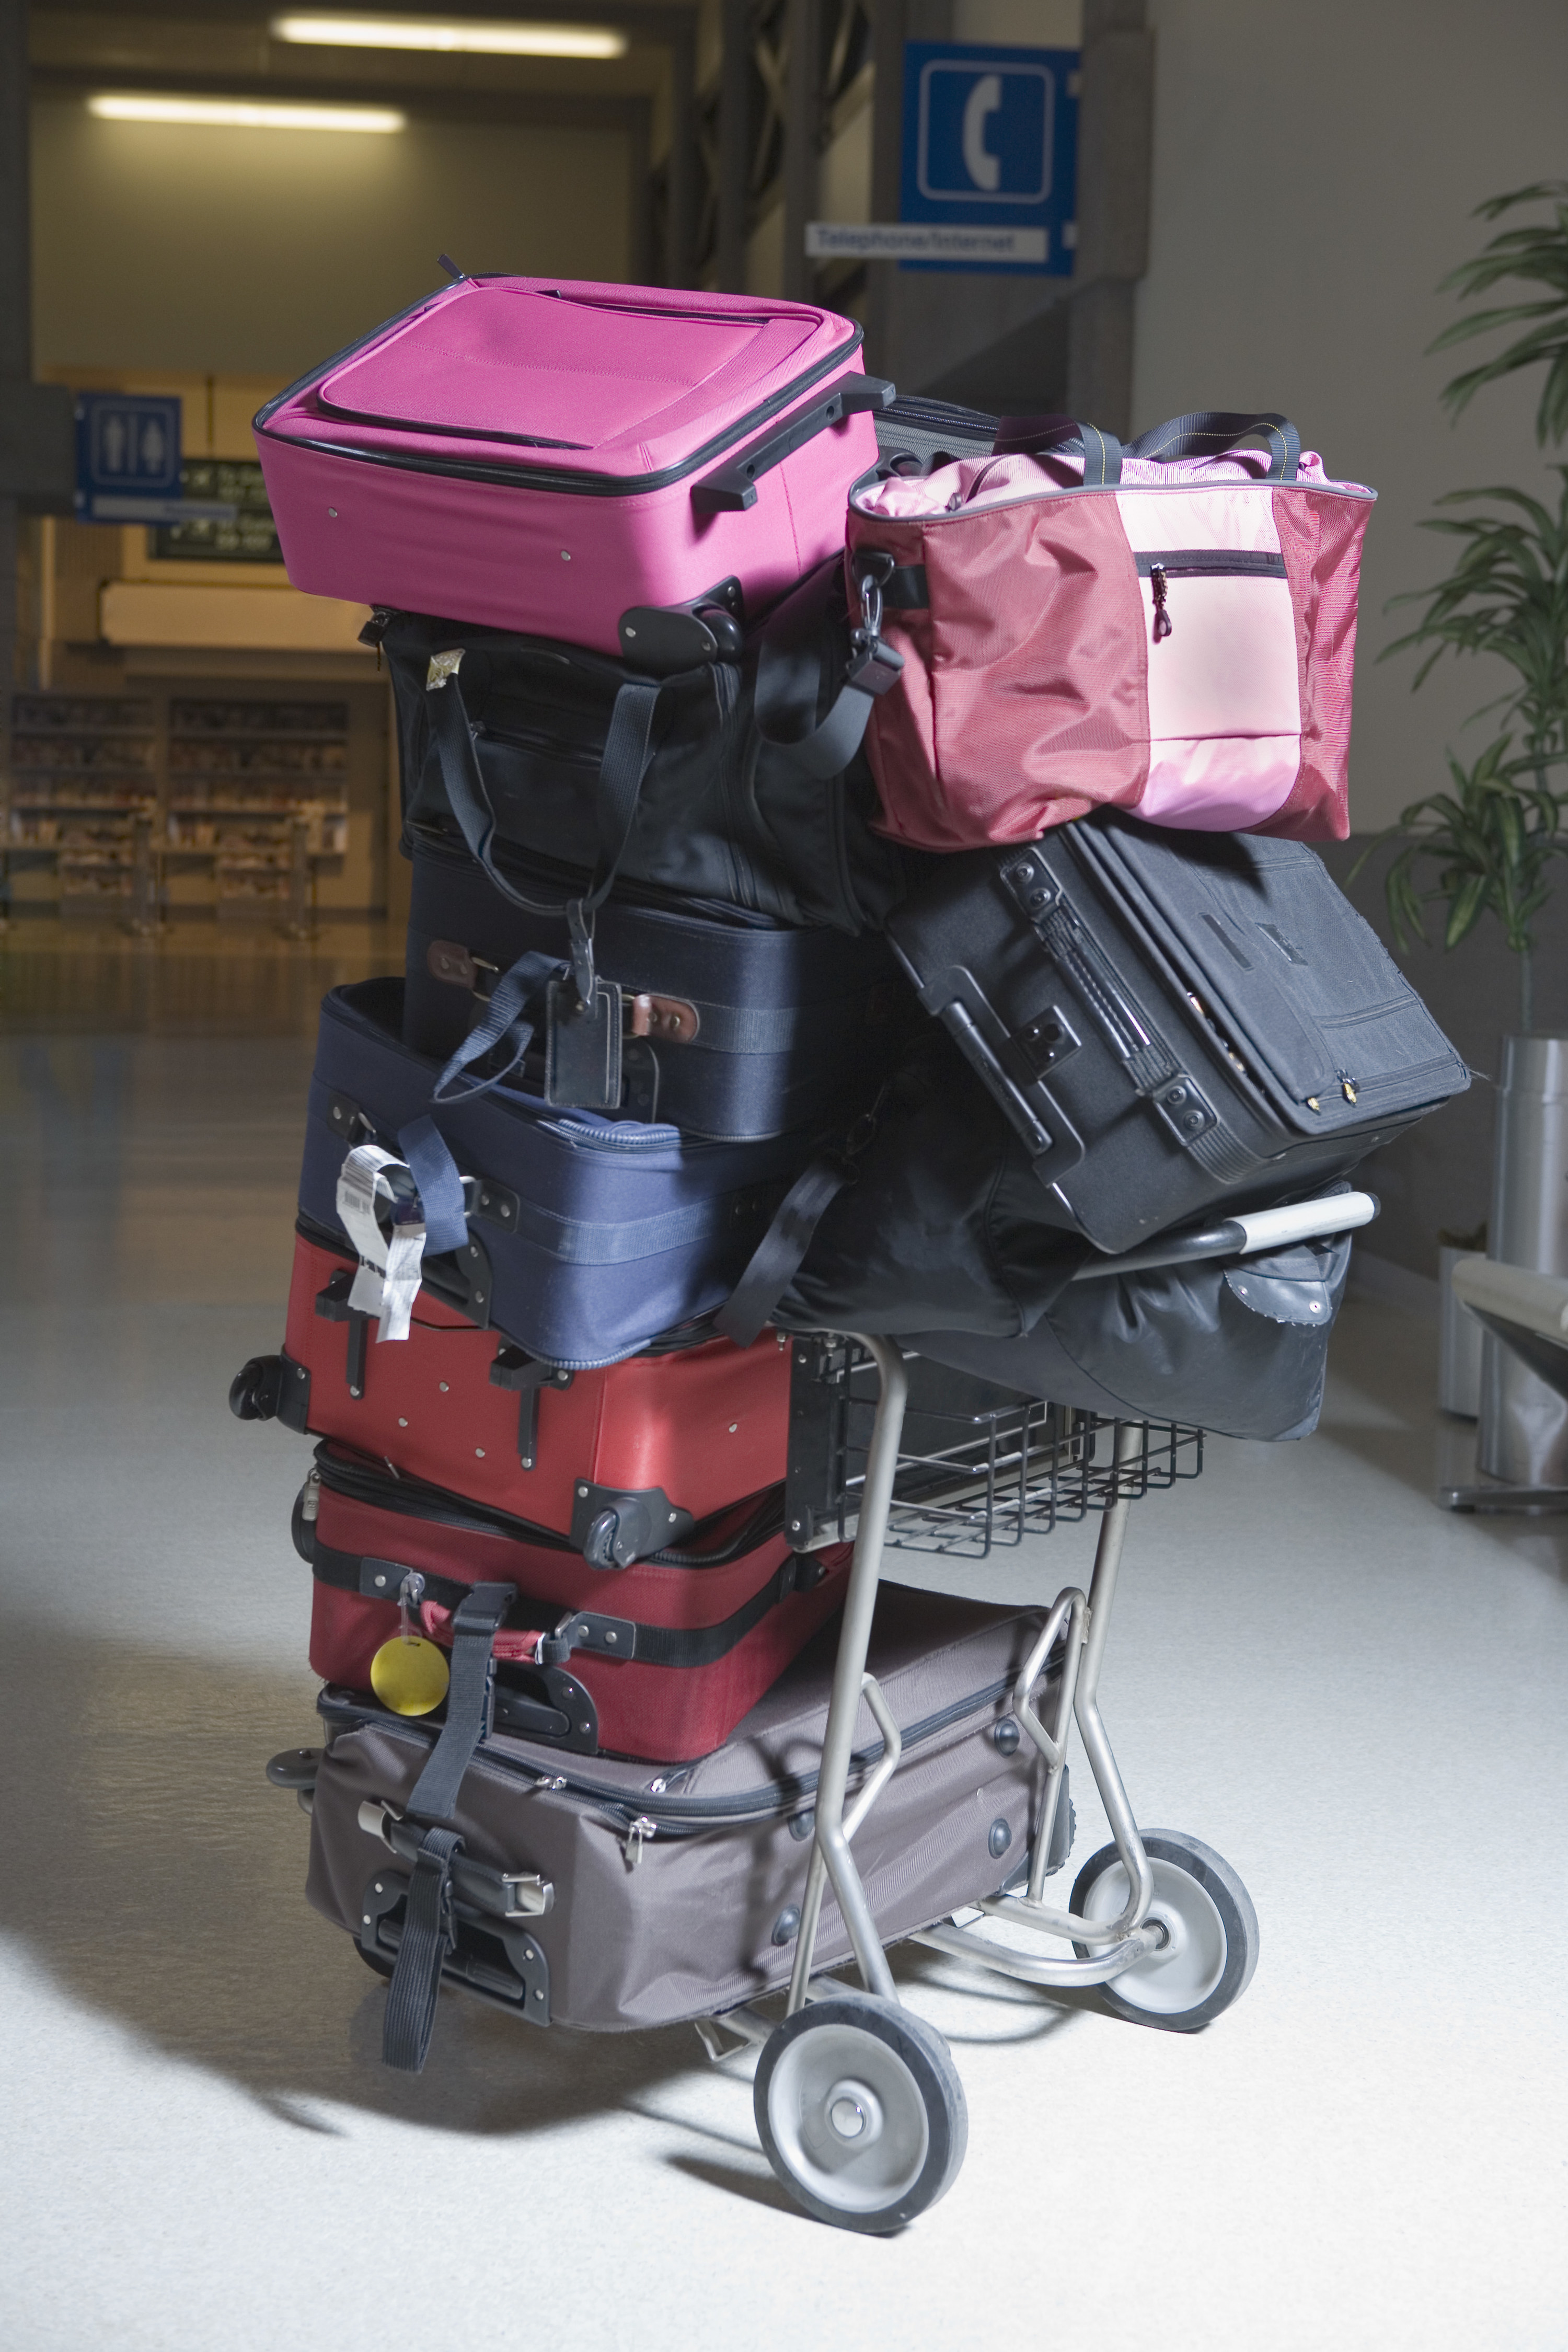 big pile of suitcases on an airport cart